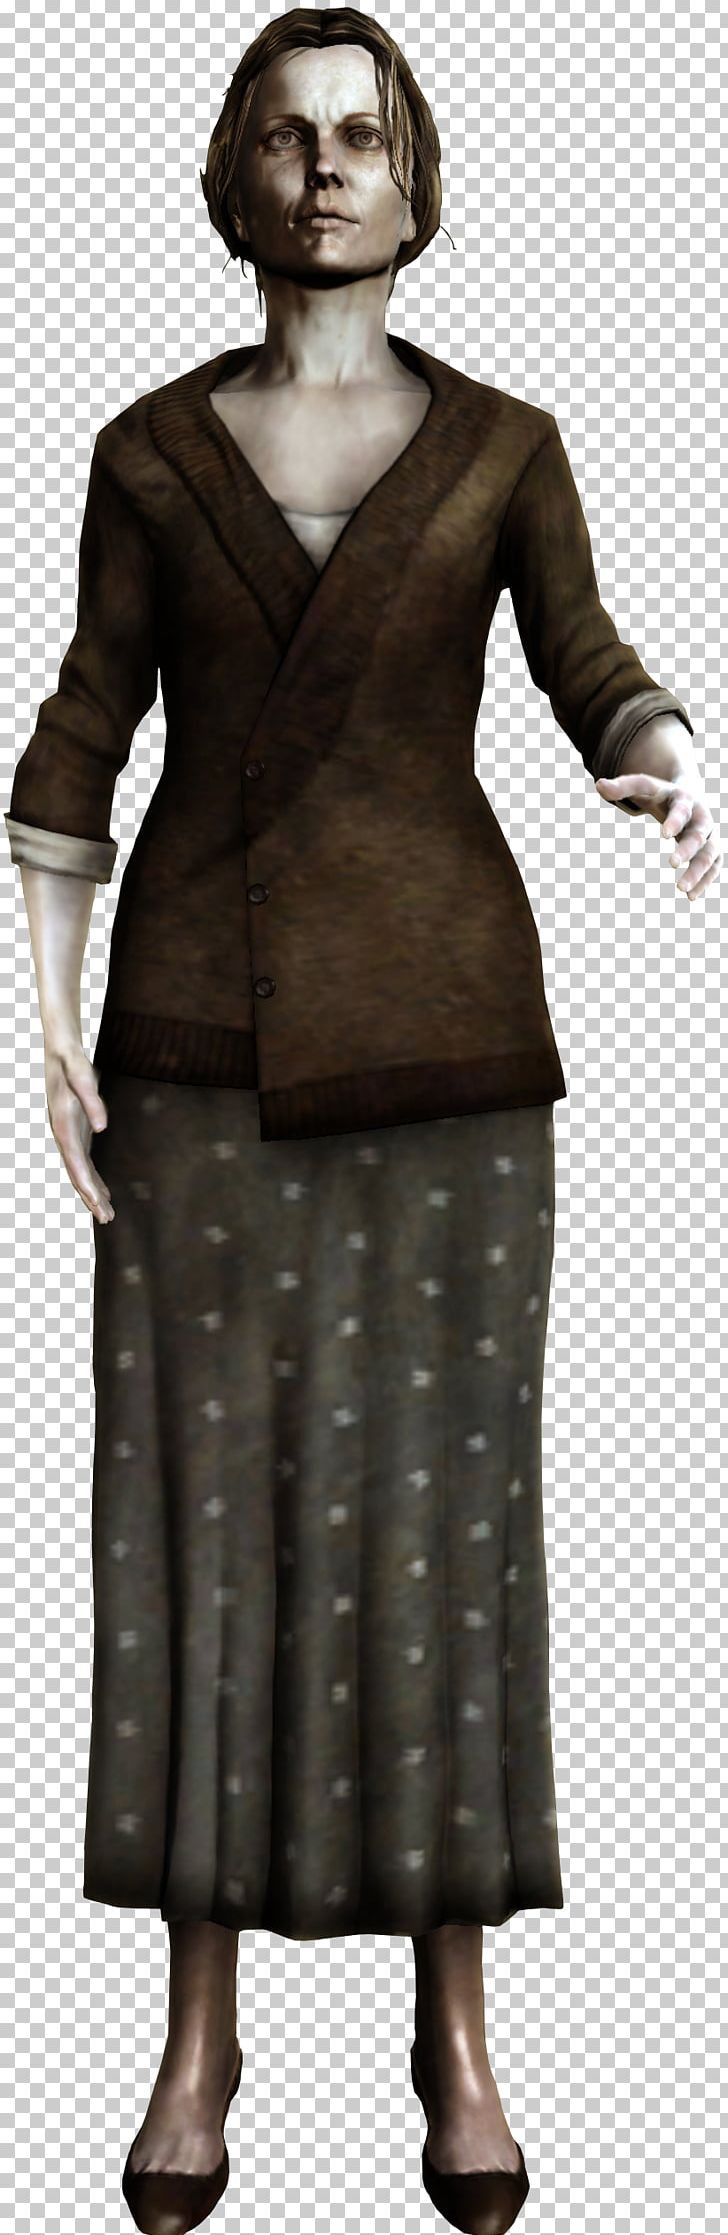 Silent Hill: Homecoming Shepherd's Glen Survival Horror Character Psychological Horror PNG, Clipart, Character, Costume, Costume Design, Game, Gentleman Free PNG Download